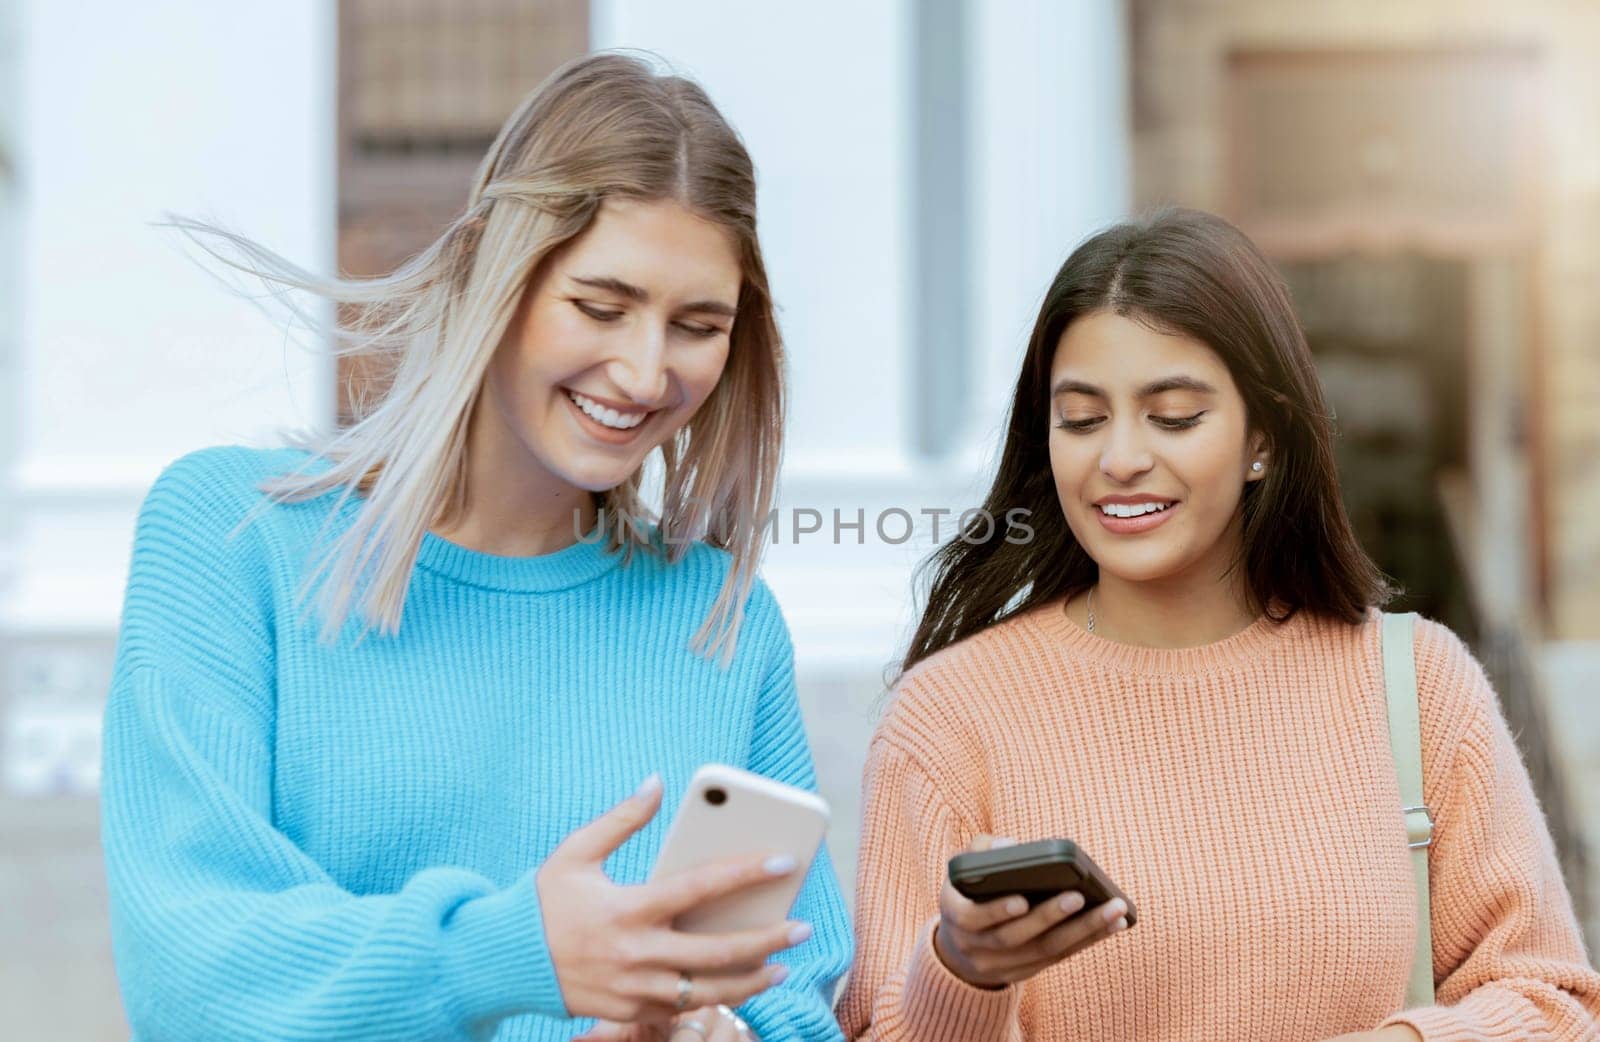 Friends, women with smartphone, social media and technology with students on campus, online and outdoor. Connection, meme or post with happiness, communication with 5g network and Gen z youth.